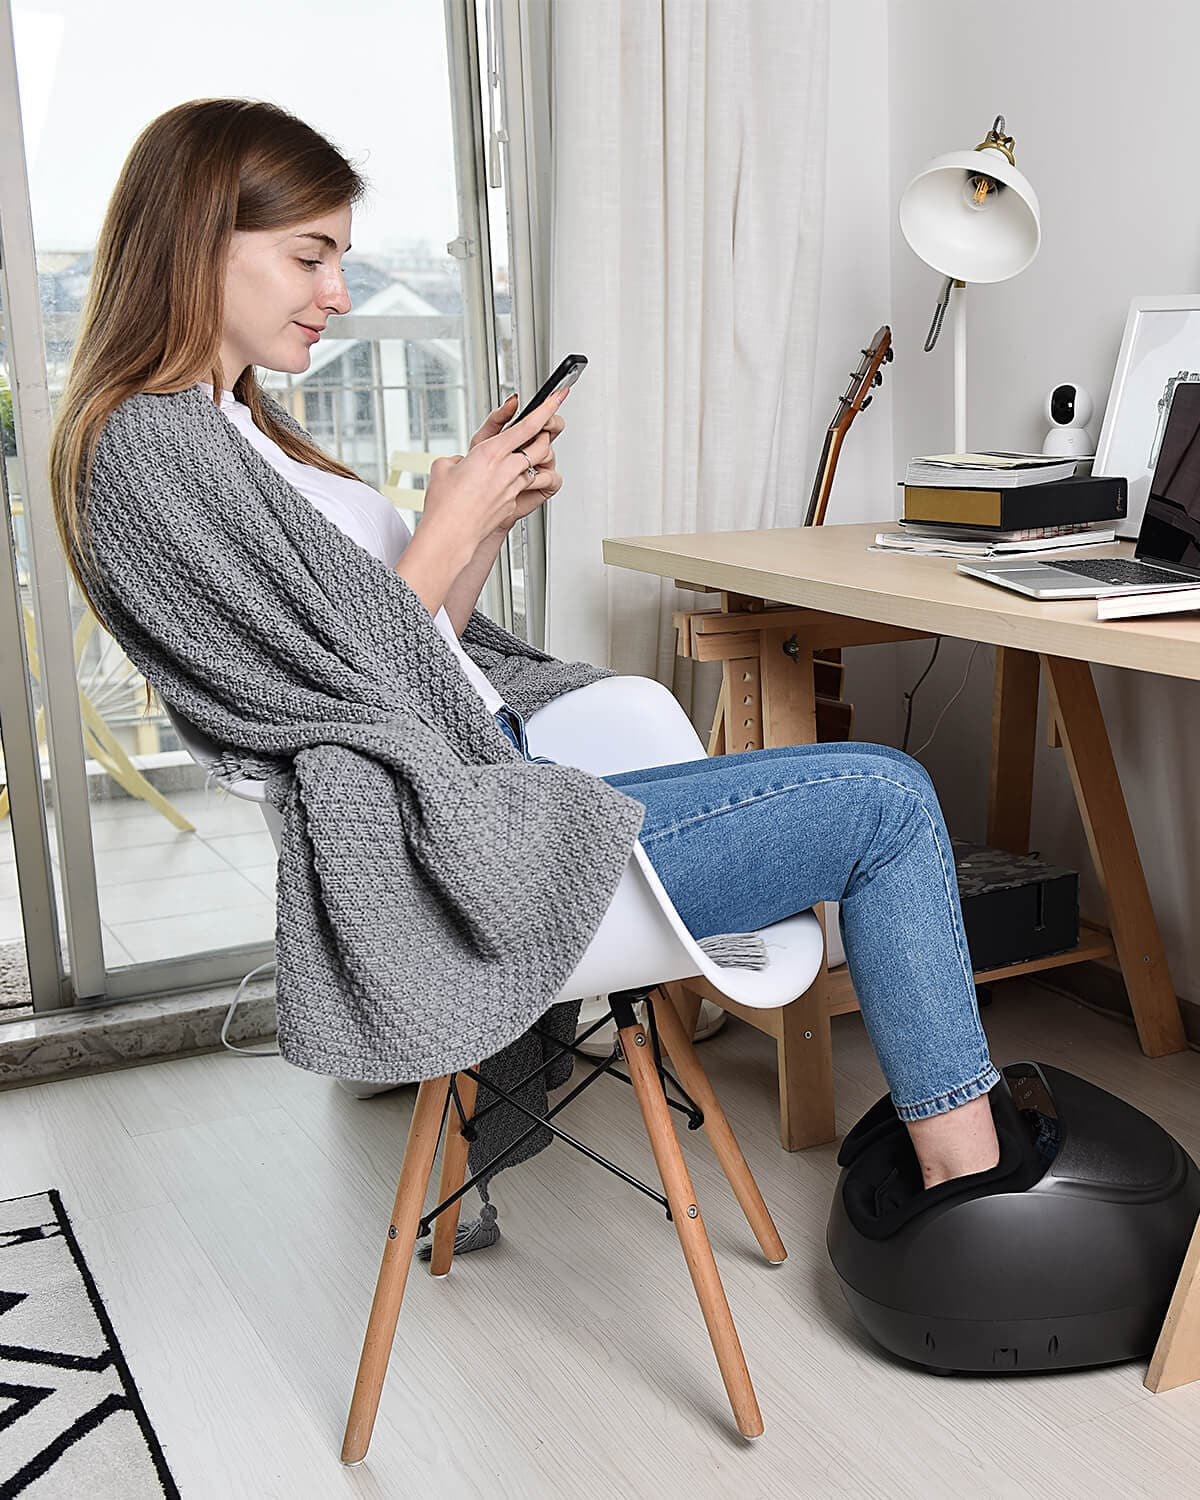 A woman sits in a modern white chair using her smartphone, draped in a gray cardigan and blue jeans. She is in a well-lit room with a desk, computer, and guitar while enjoying the Renpho EU Shiatsu Foot Massager Premium.